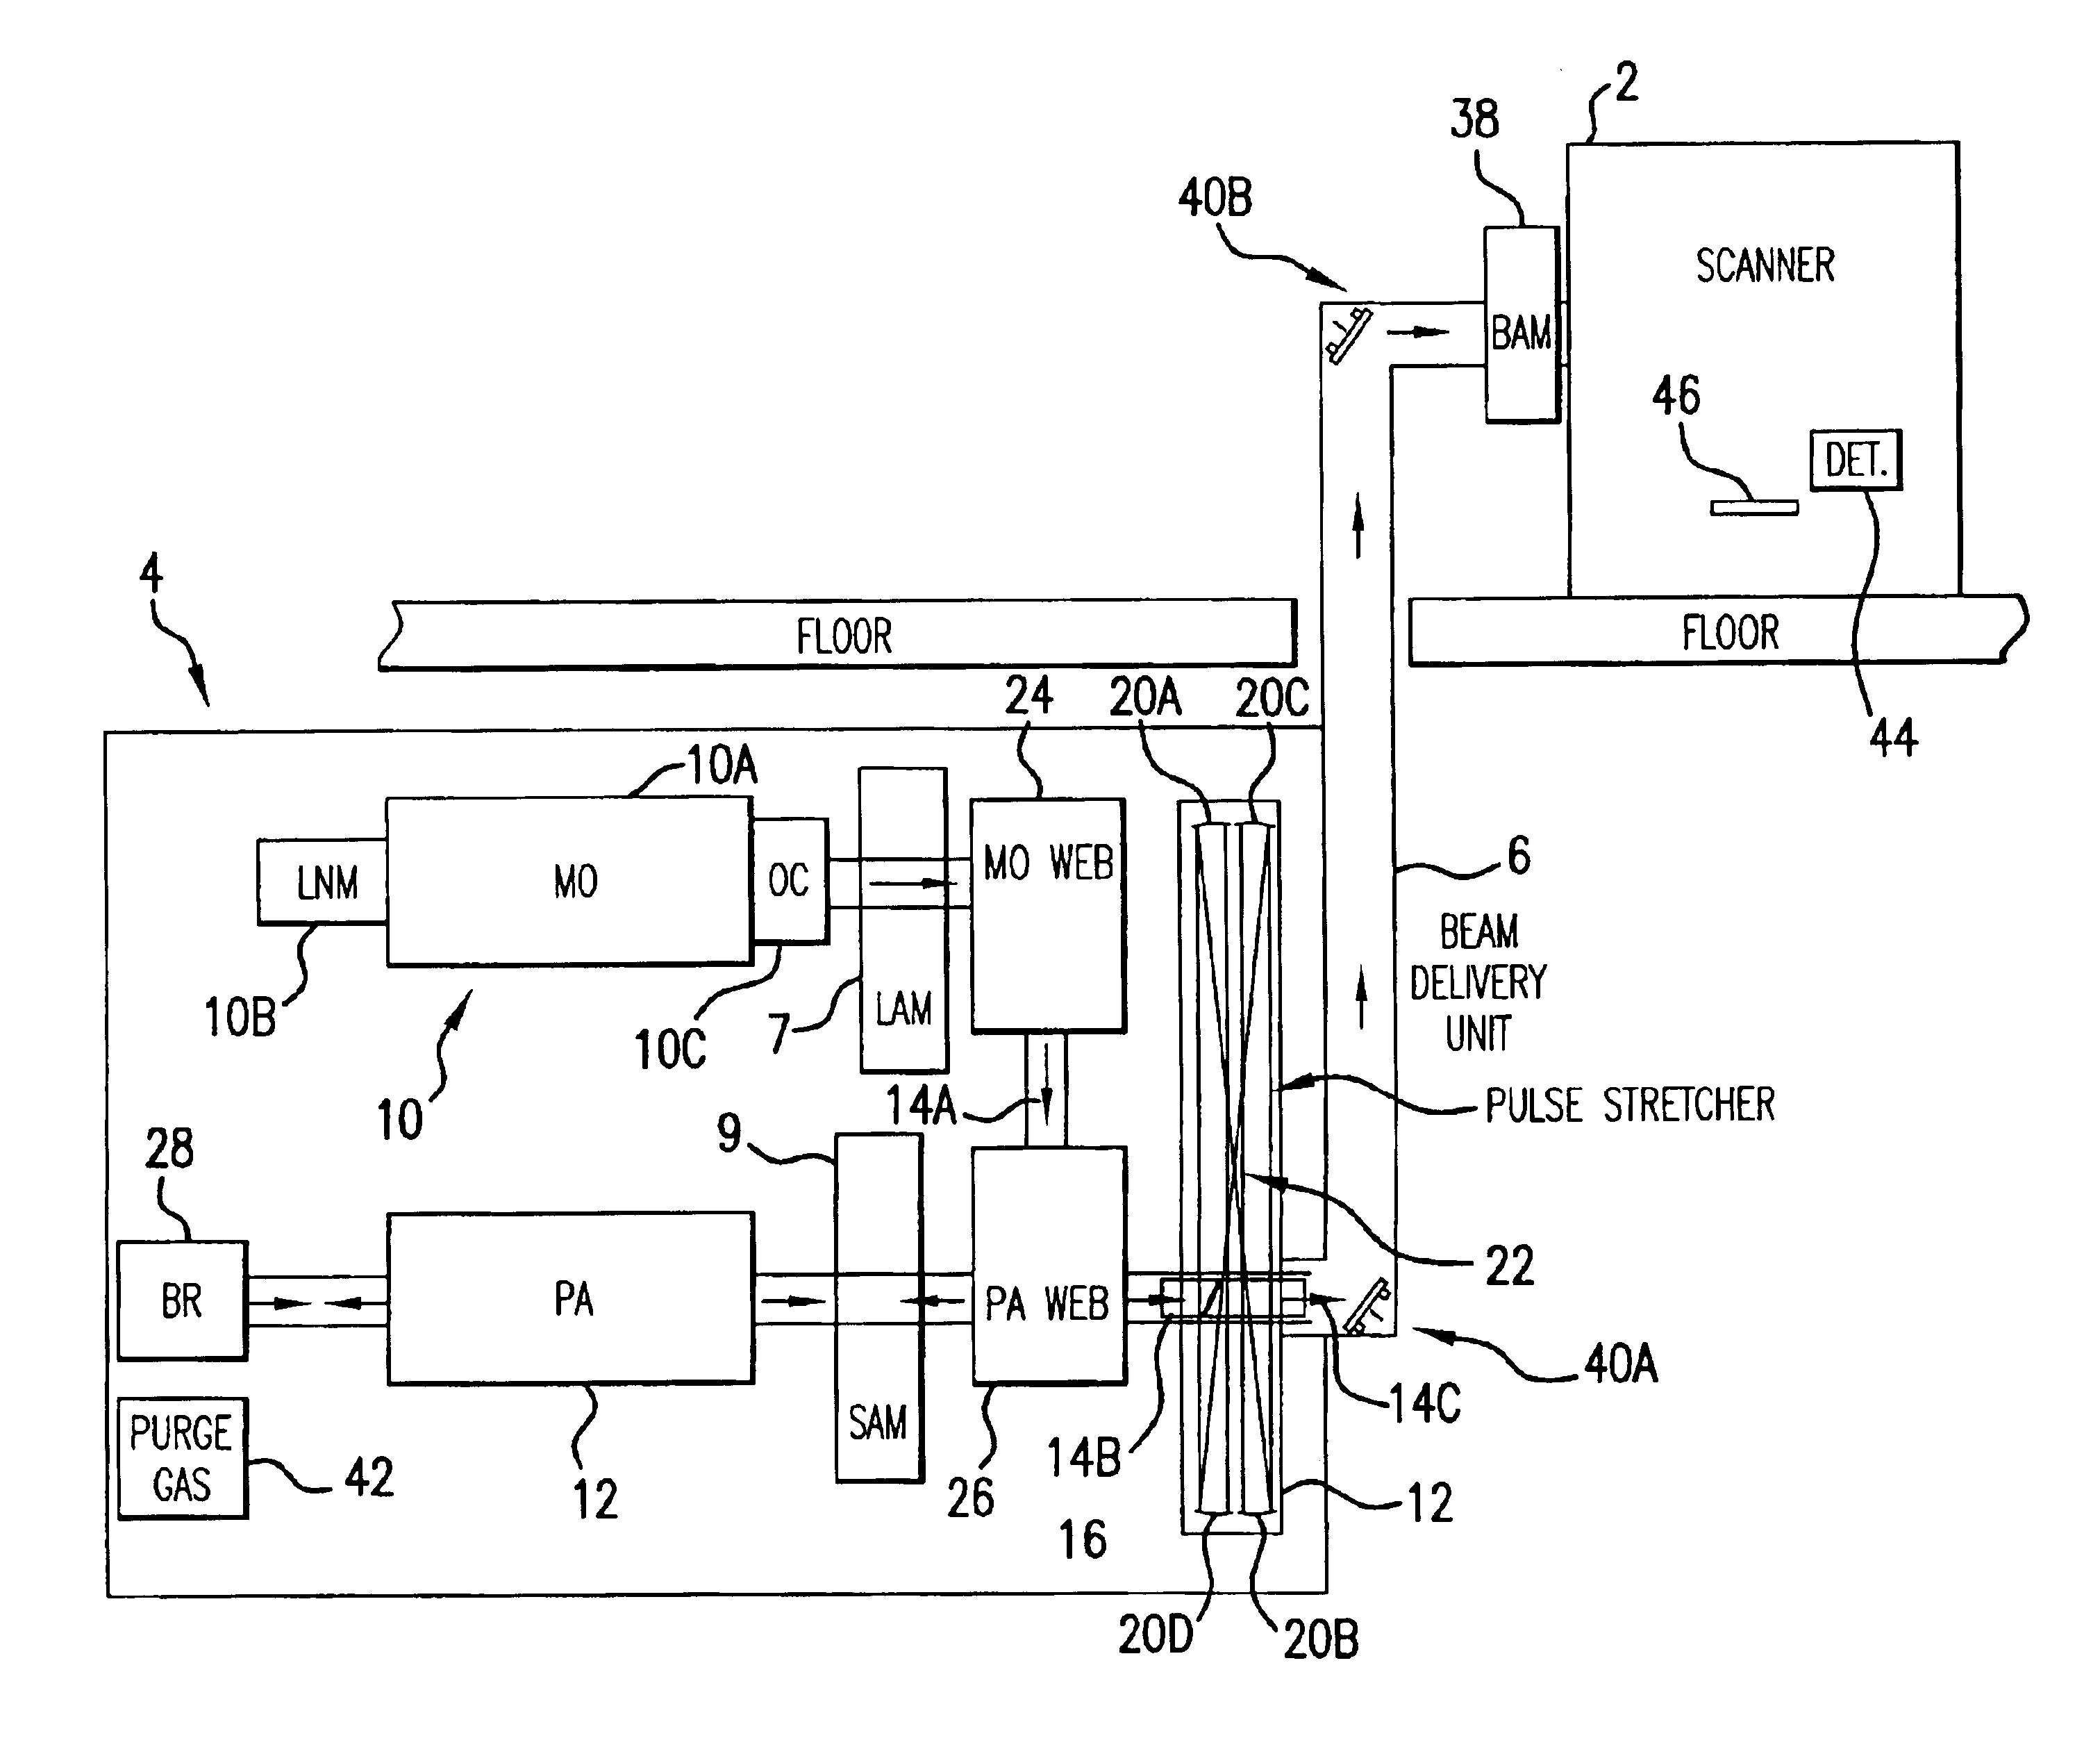 Automatic gas control system for a gas discharge laser